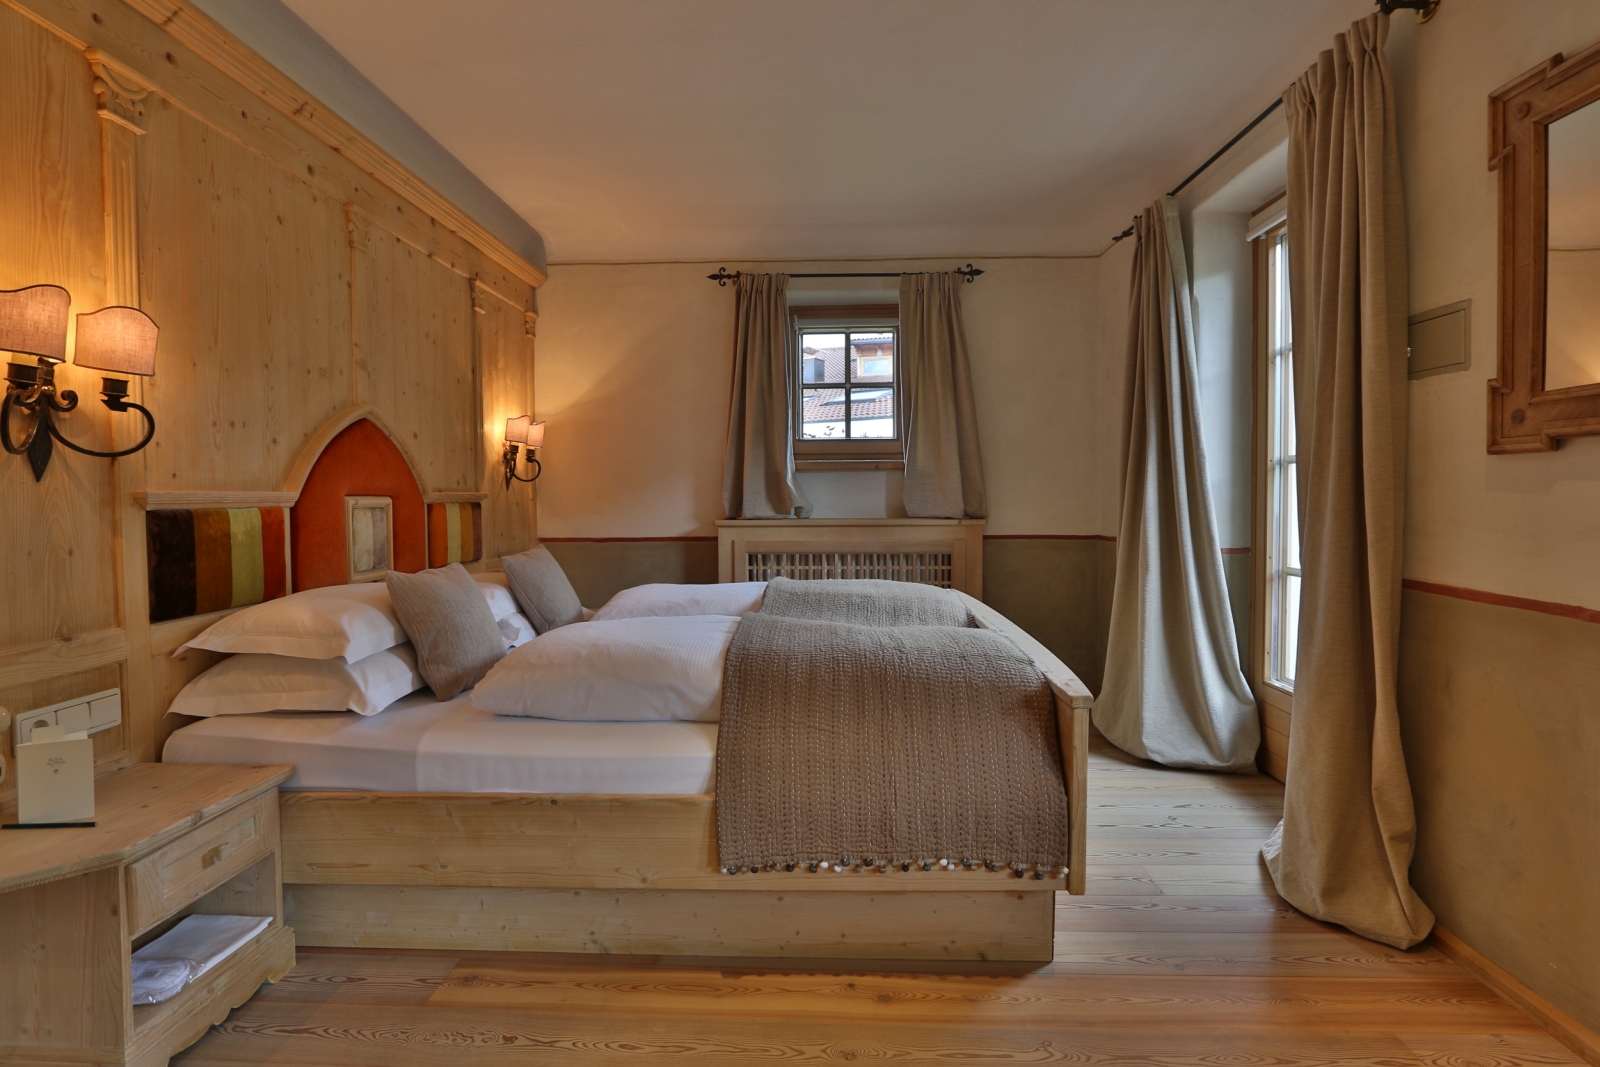 Deluxe room with wooden wall and features and a natural colour palette at luxury hotel Rosa Alpina in Italy